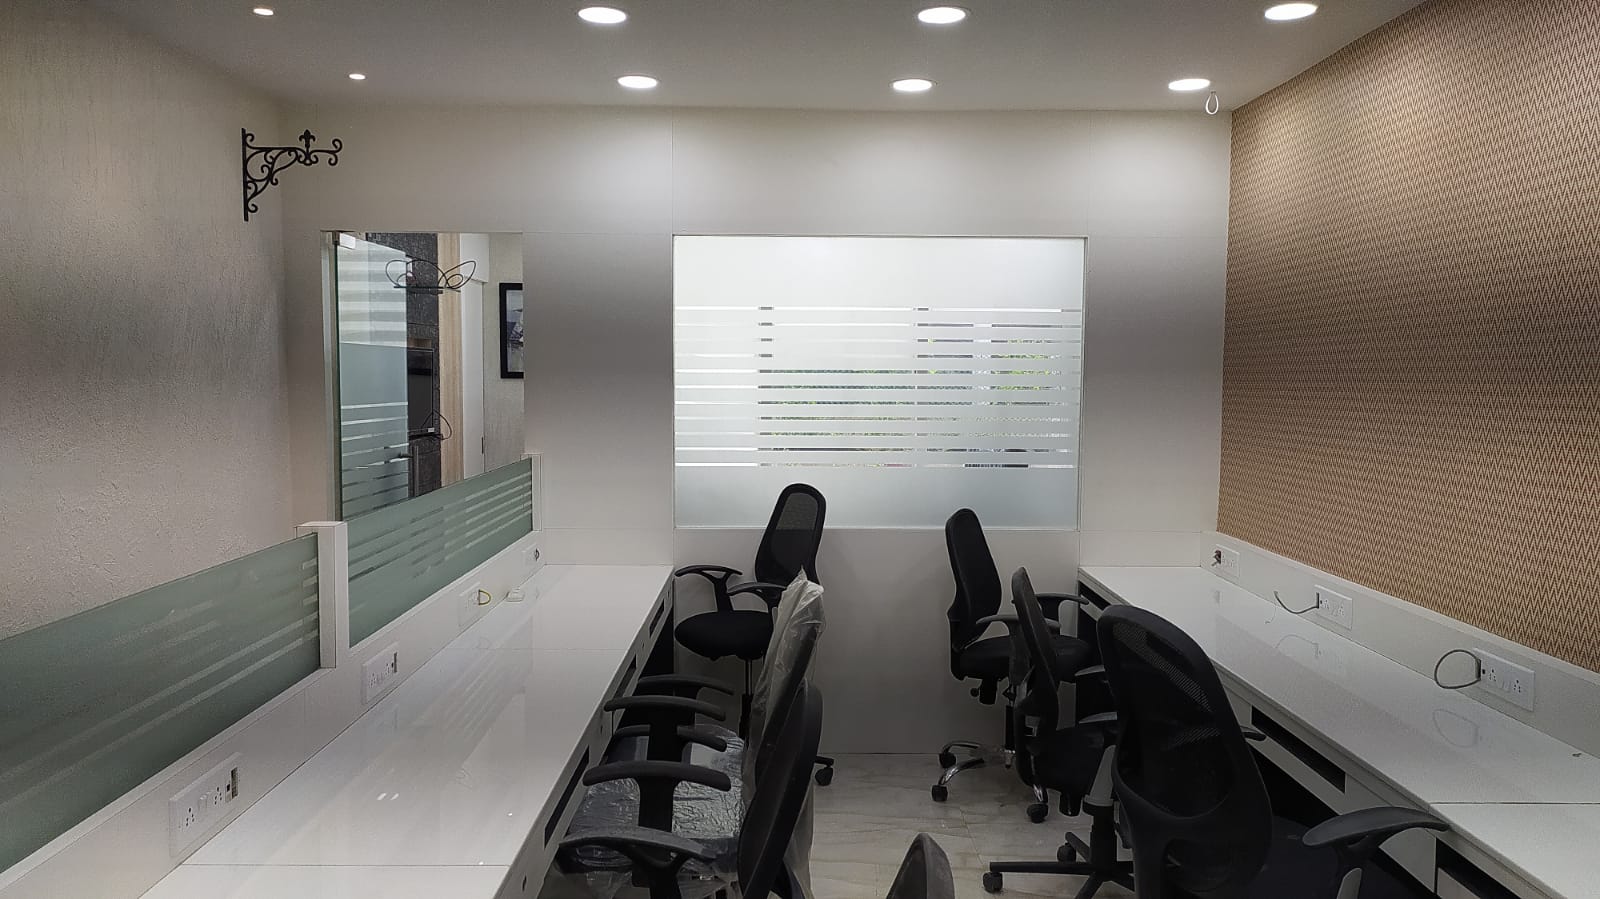 Office For Rent in New Town Kolkata